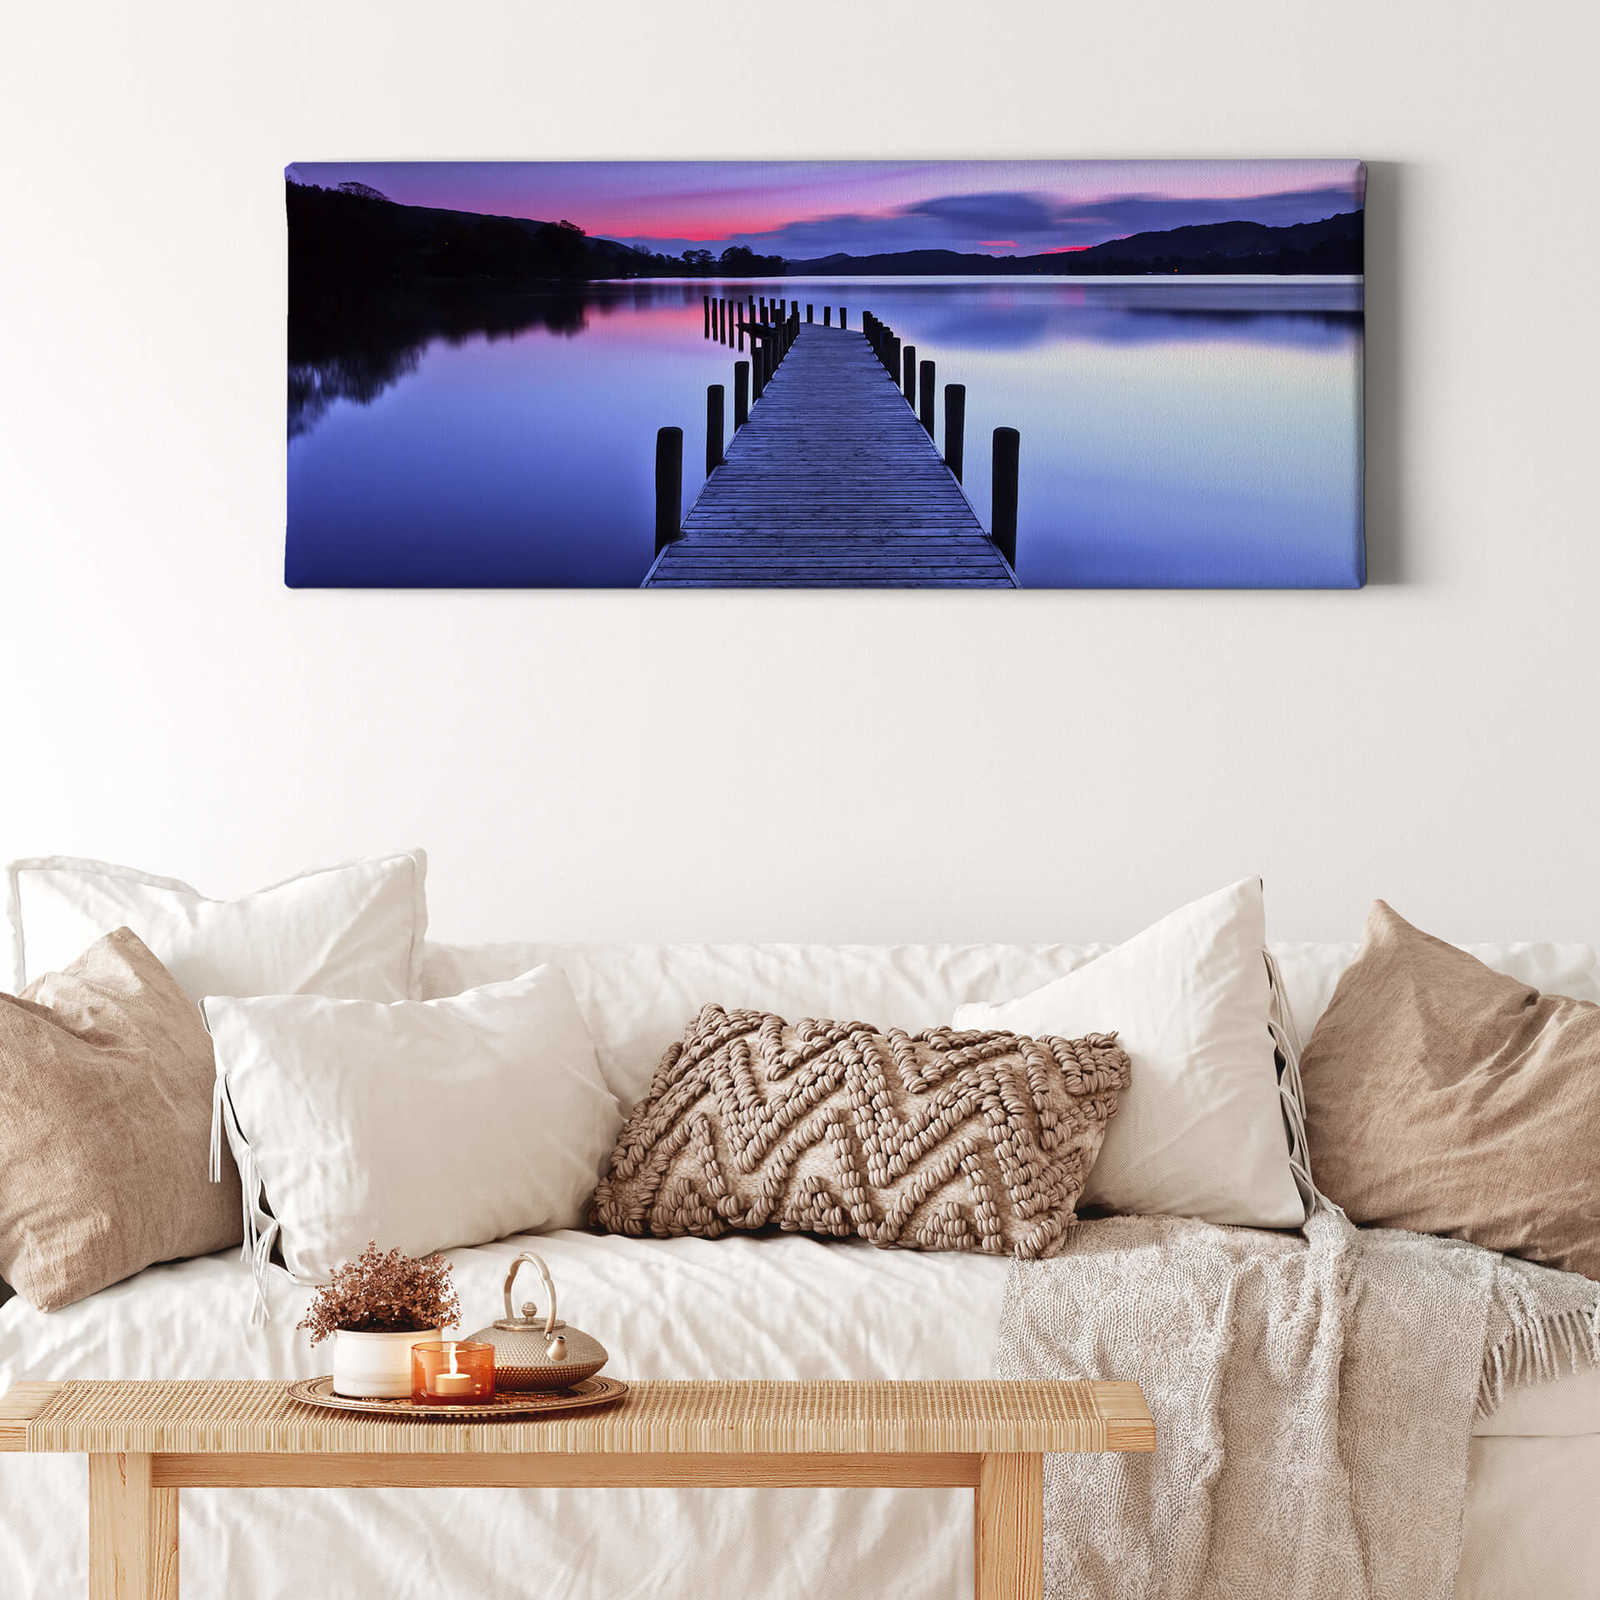             Panoramic canvas picture lake view in purple
        